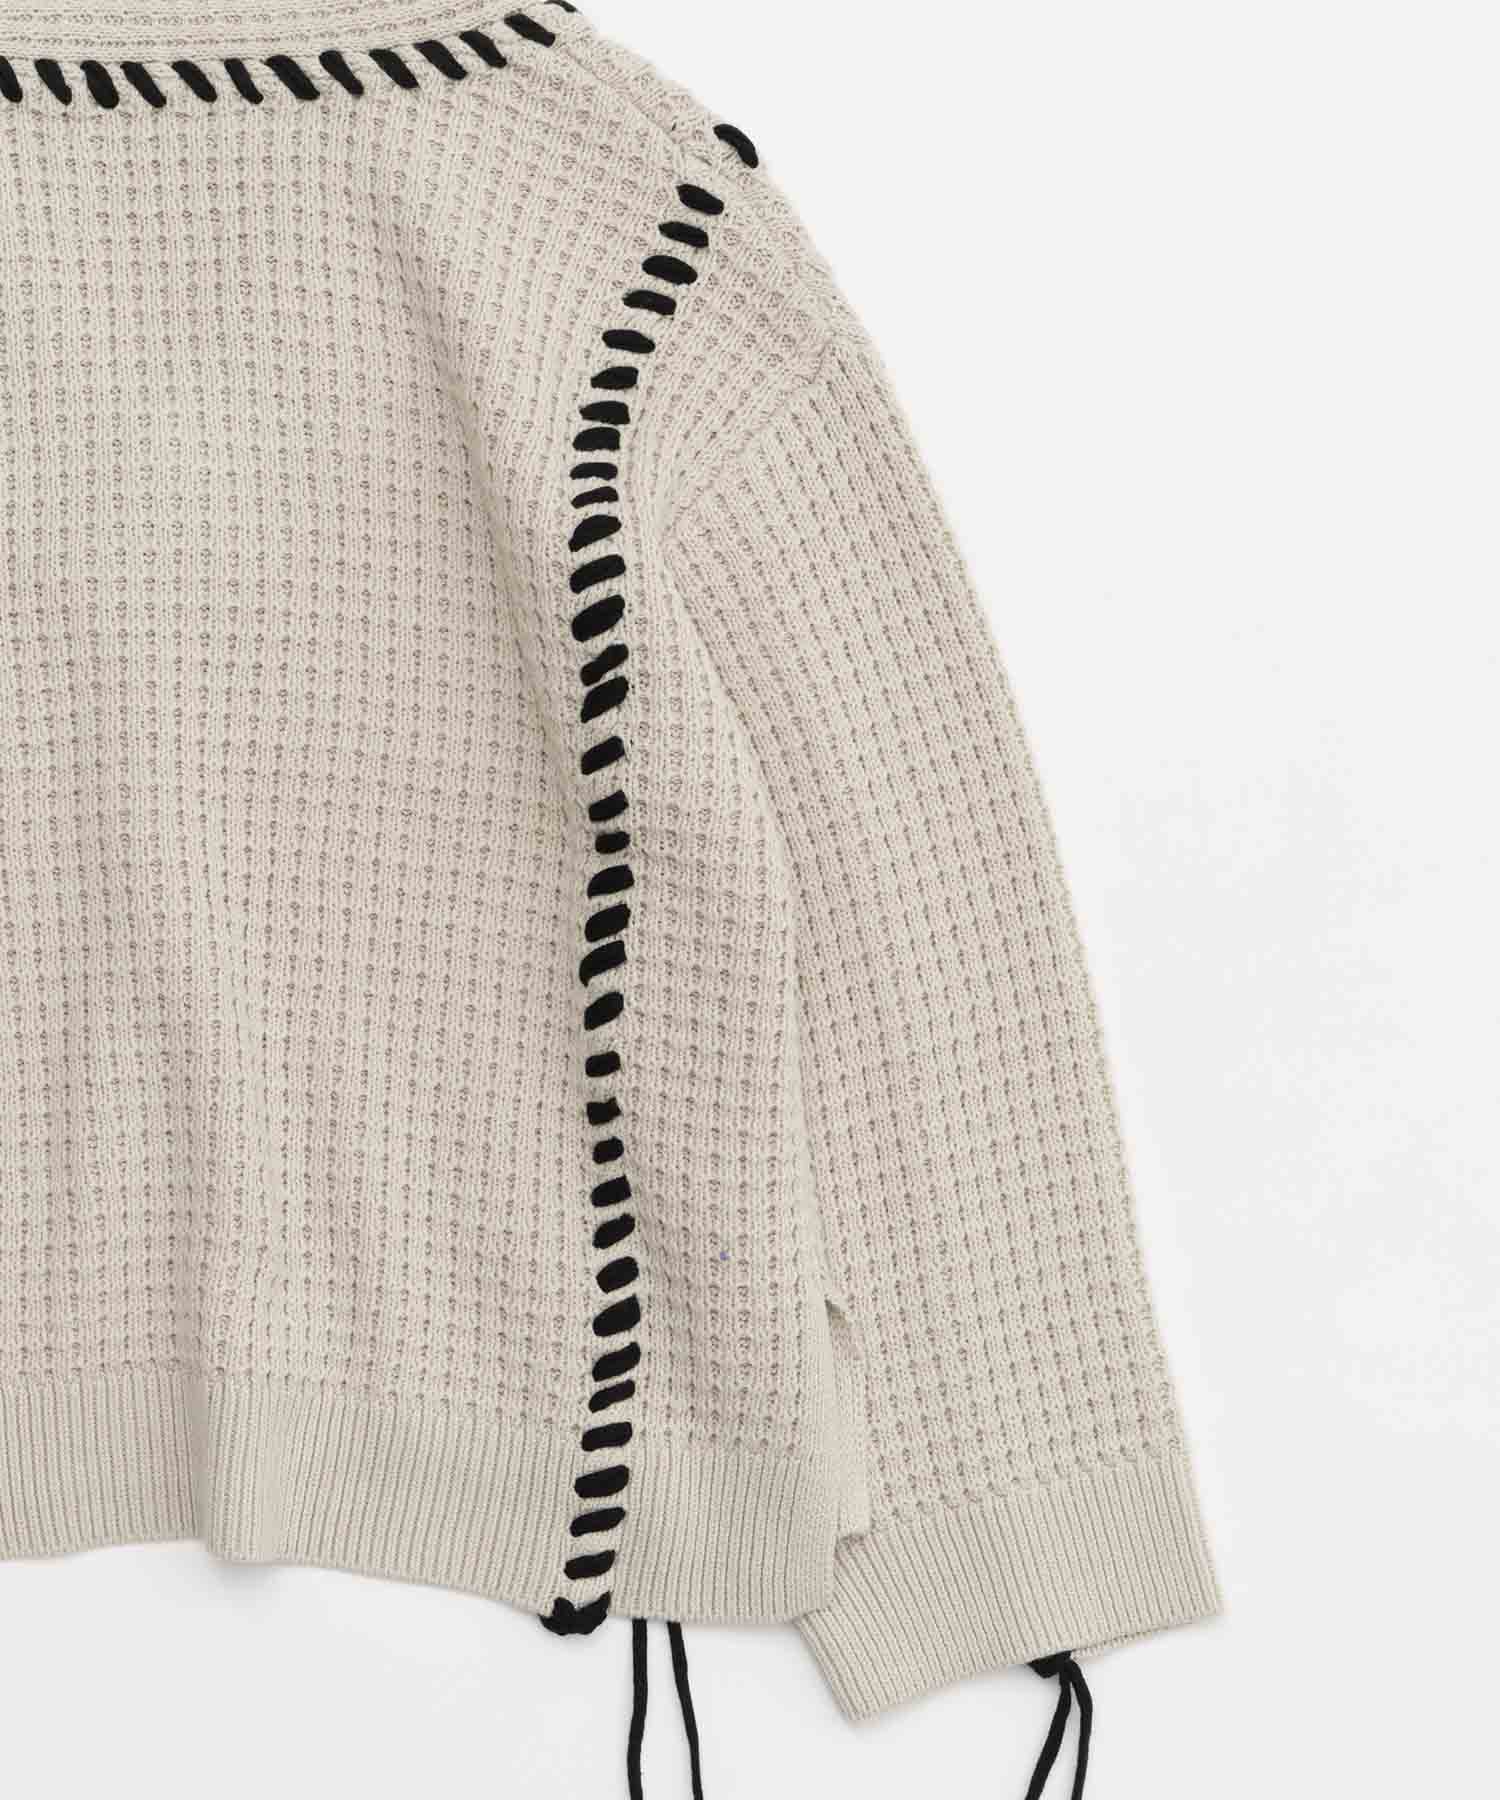 [SALE] Oni-Waffle Embroidery Prime-Over V-Neck Knit Pullover